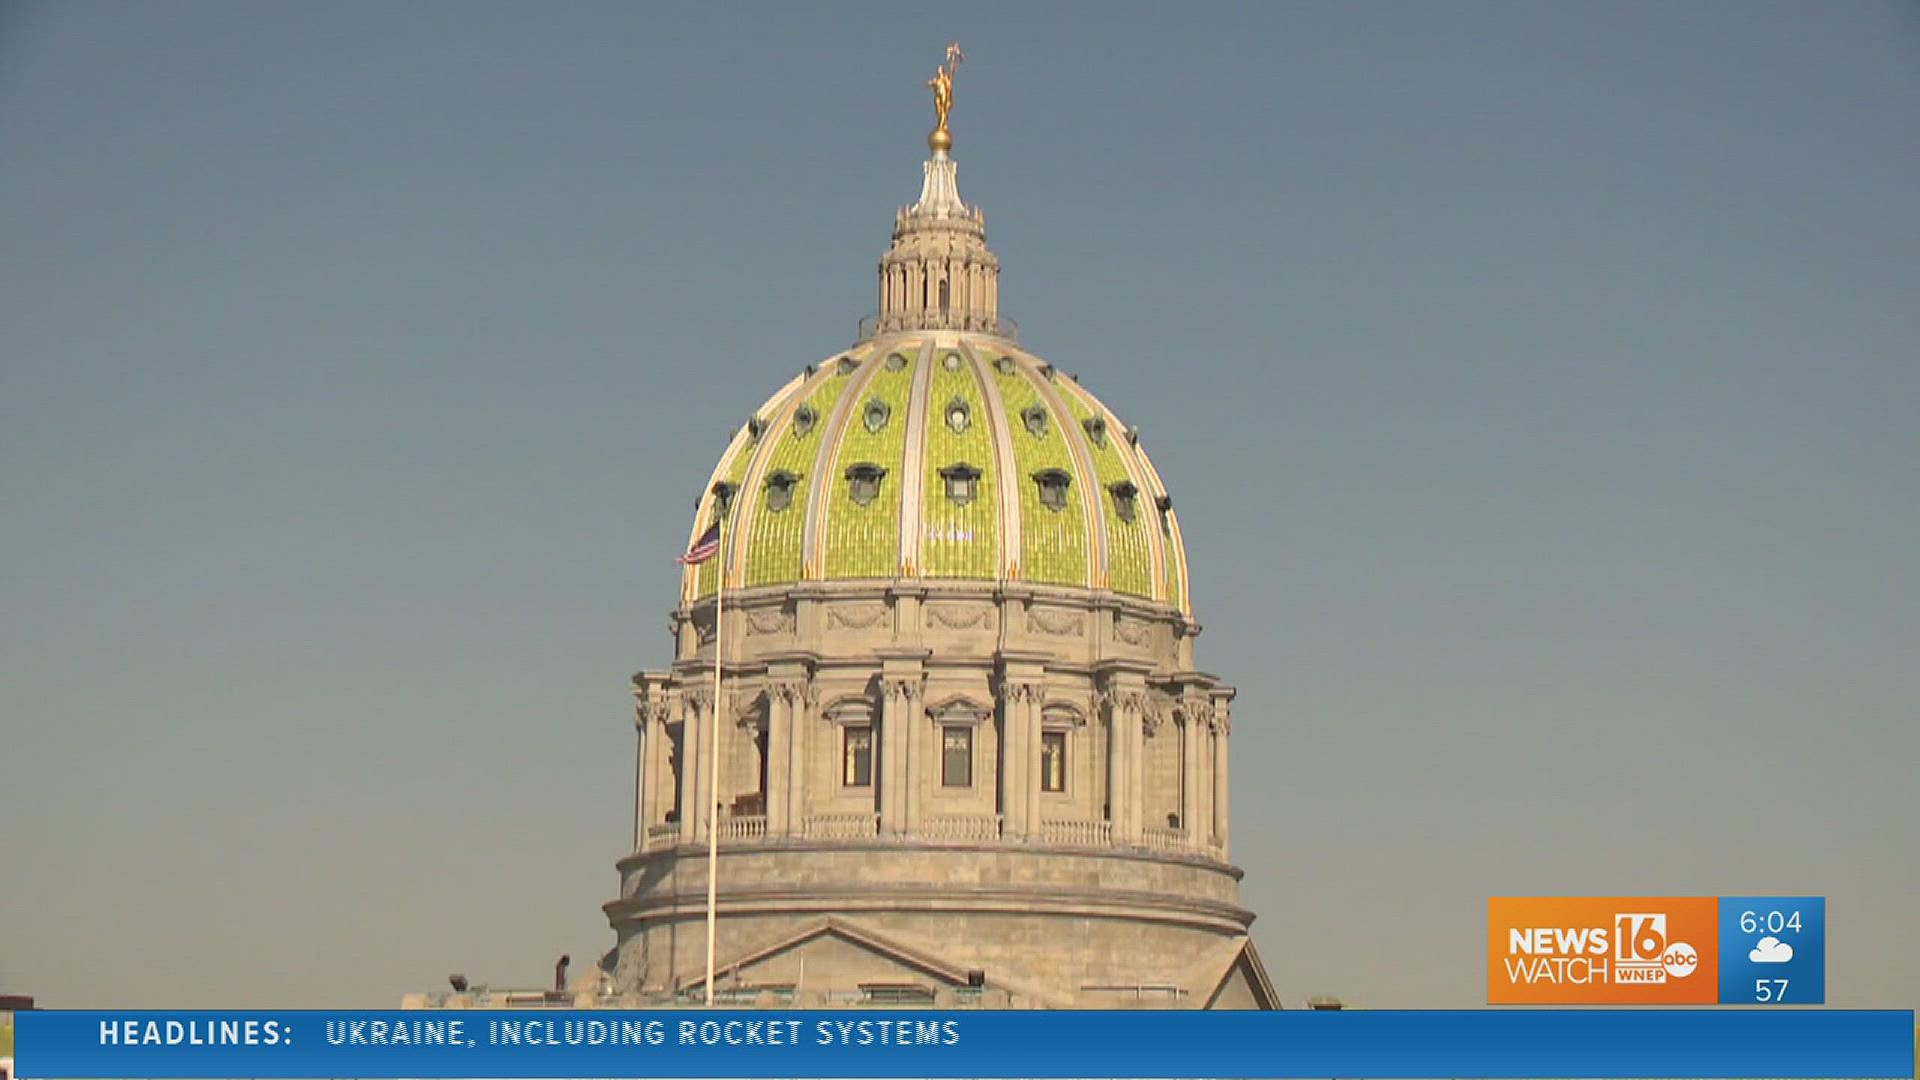 There is legislation making its way through Harrisburg that could move Pennsylvania's presidential primary.